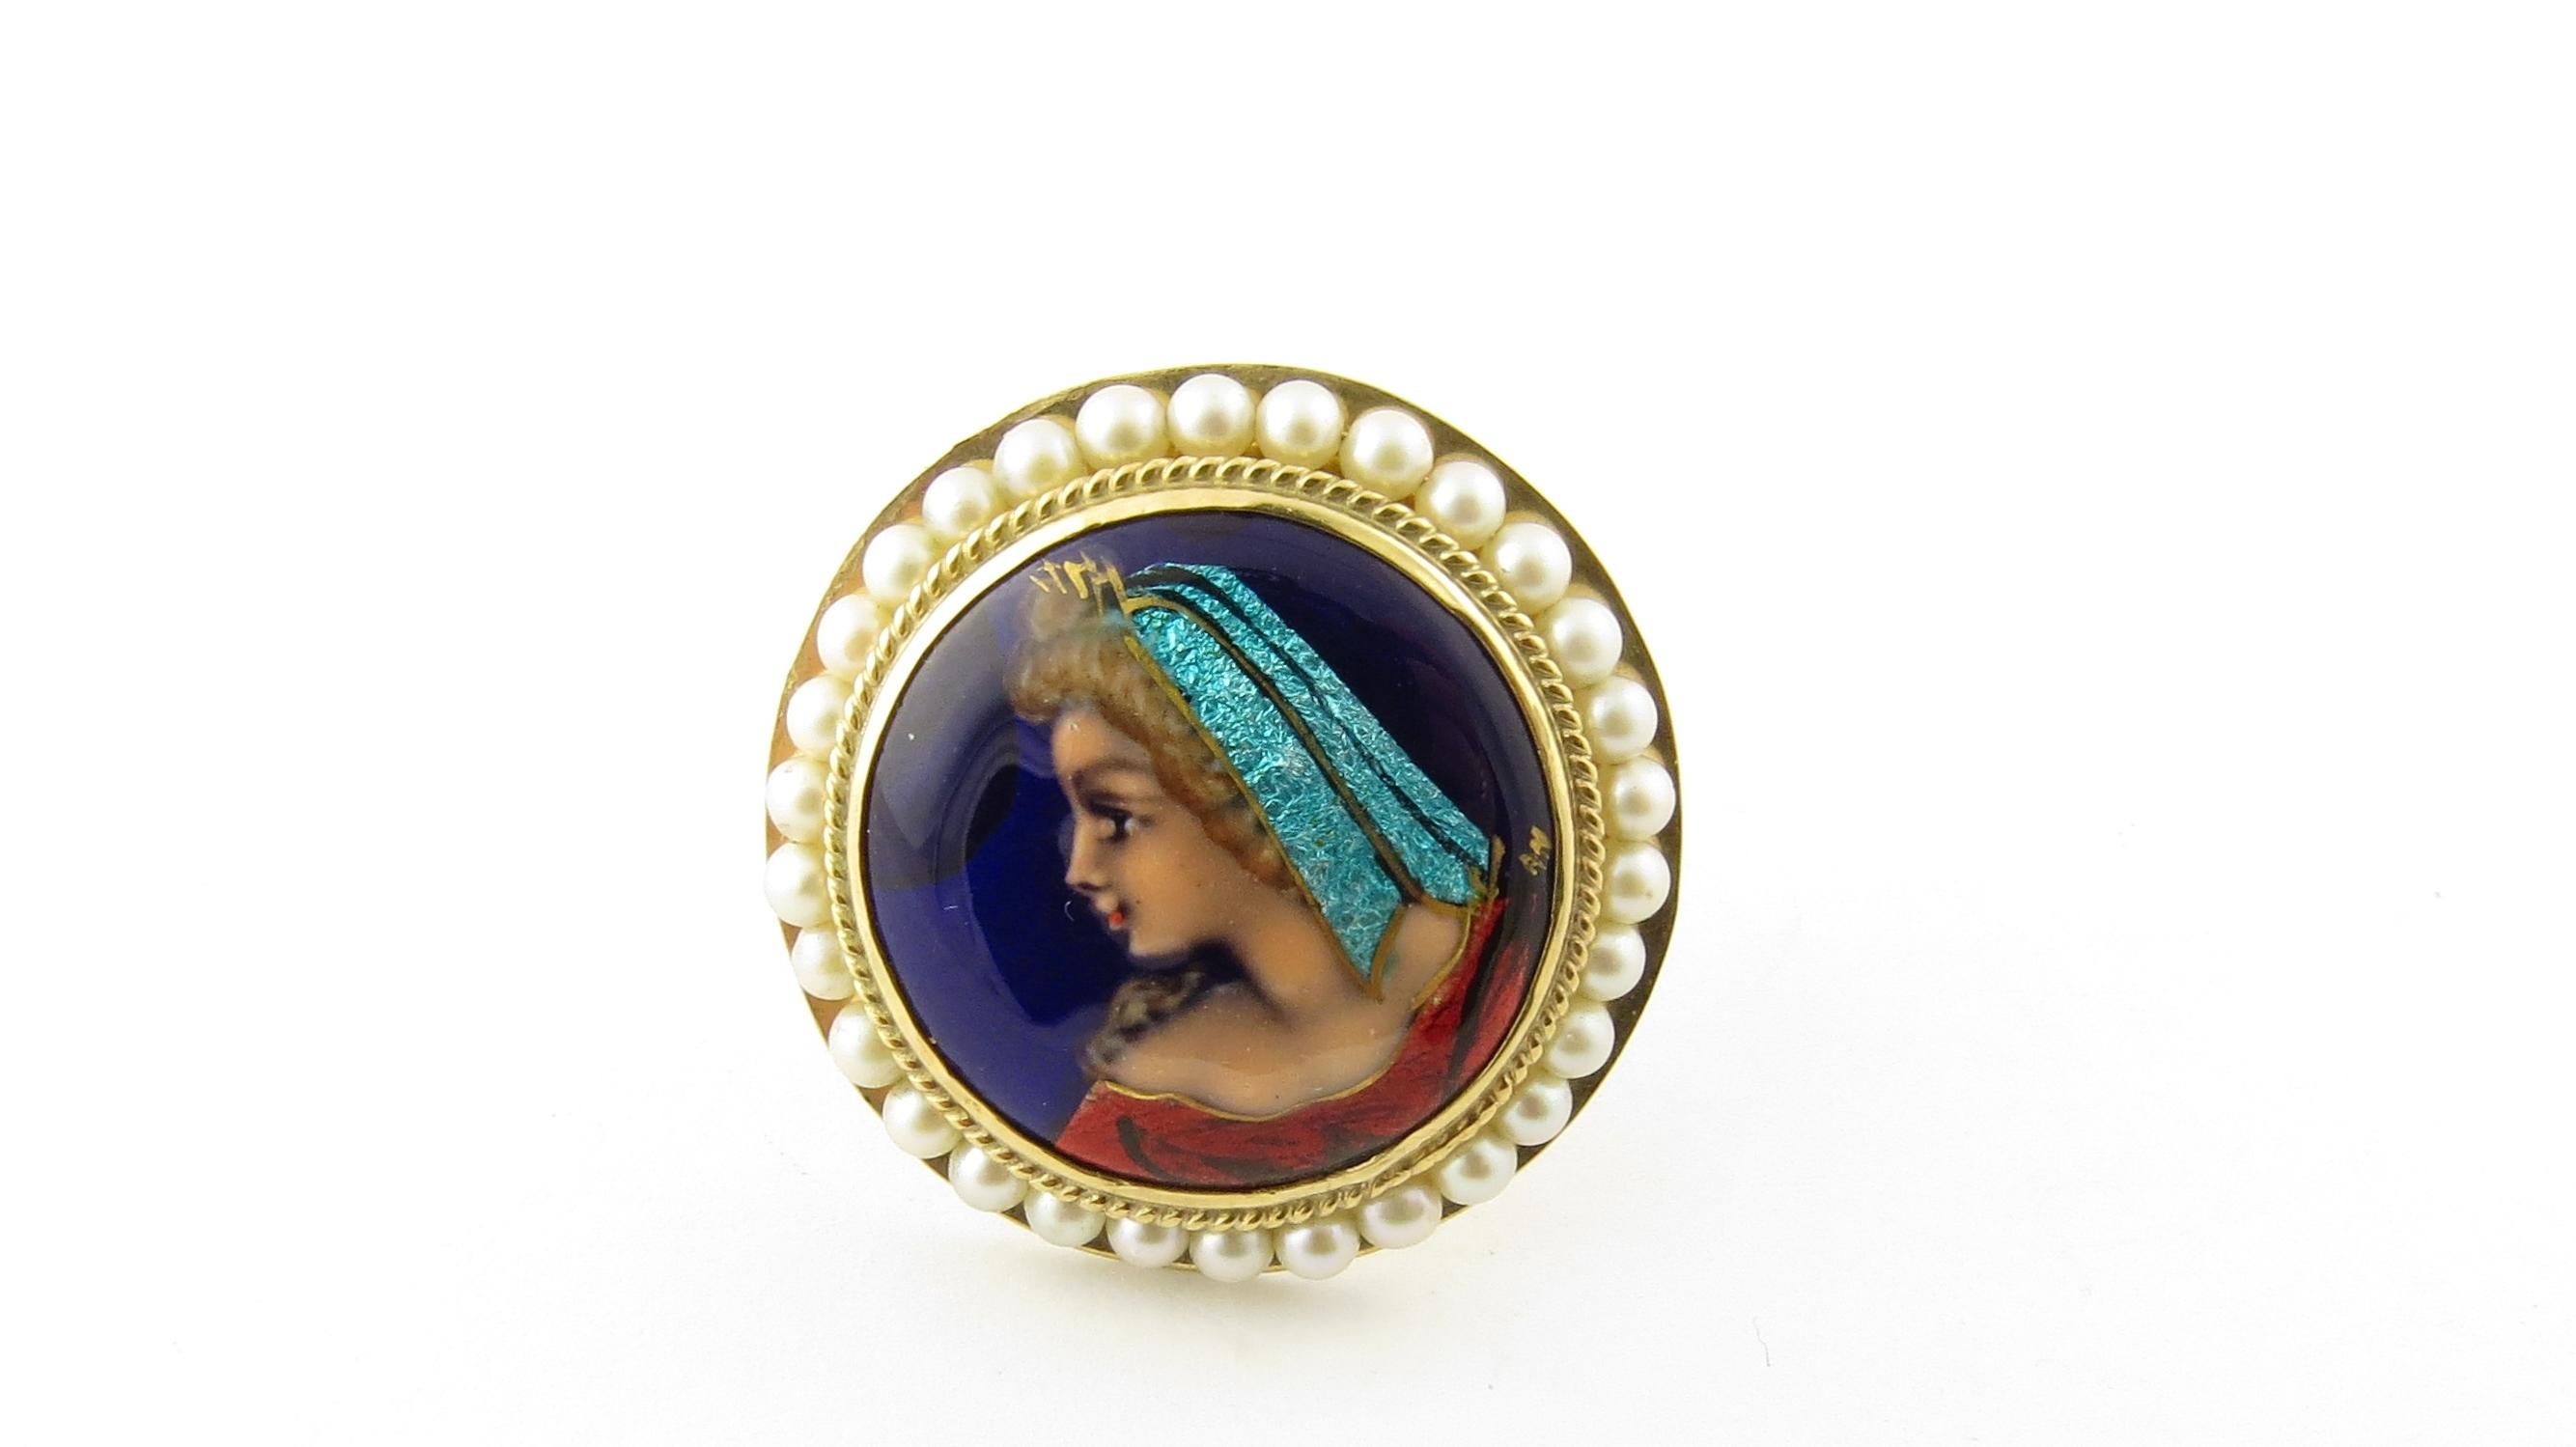 Vintage 14 Karat Yellow Gold and Seed Pearl Painted Cameo Pendant / Brooch #4384 5